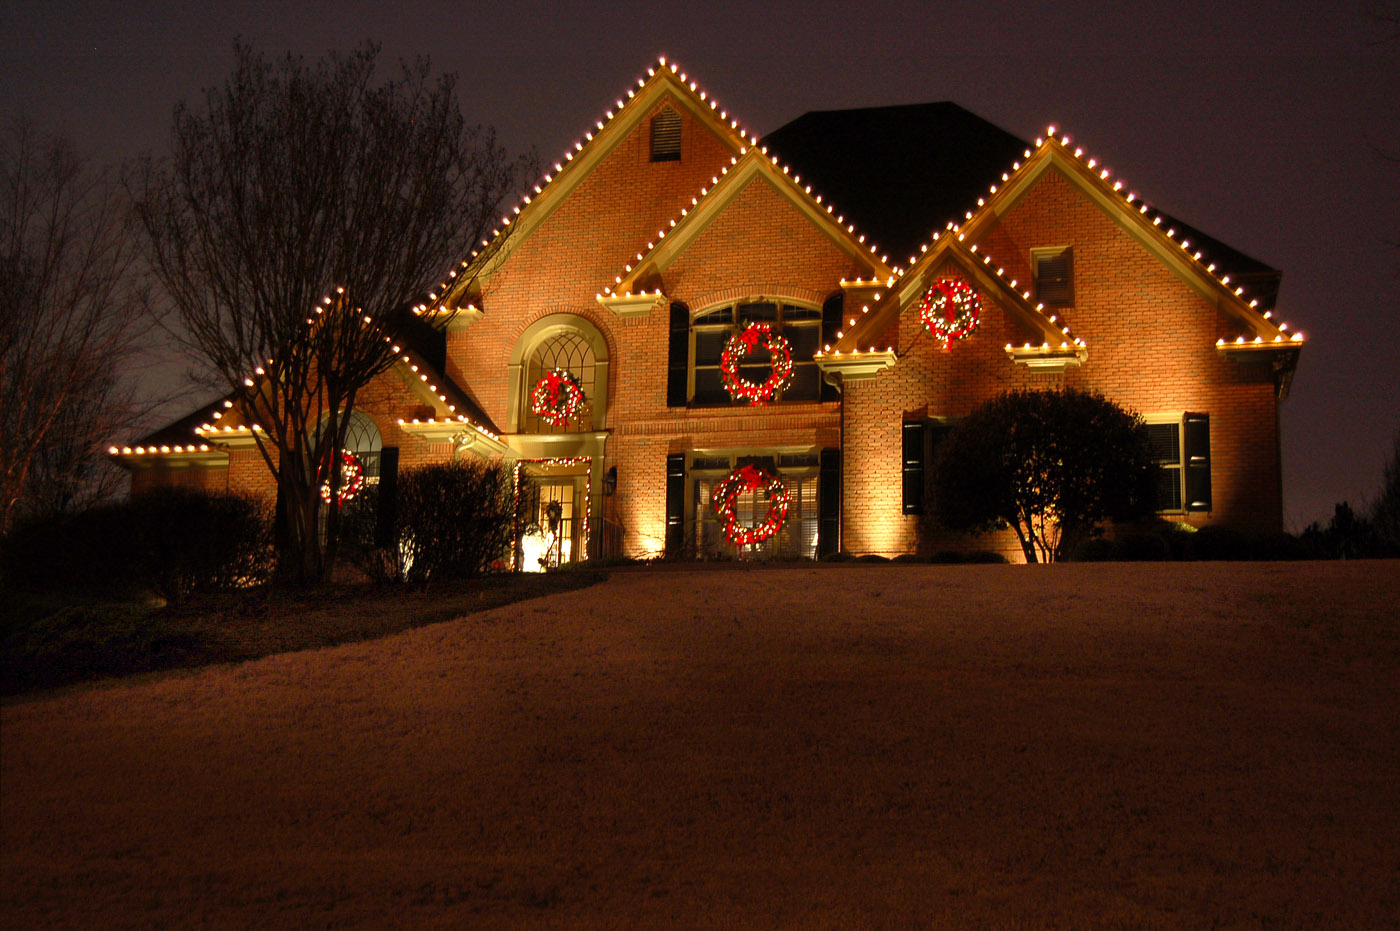 Home with holiday lighting and decorations